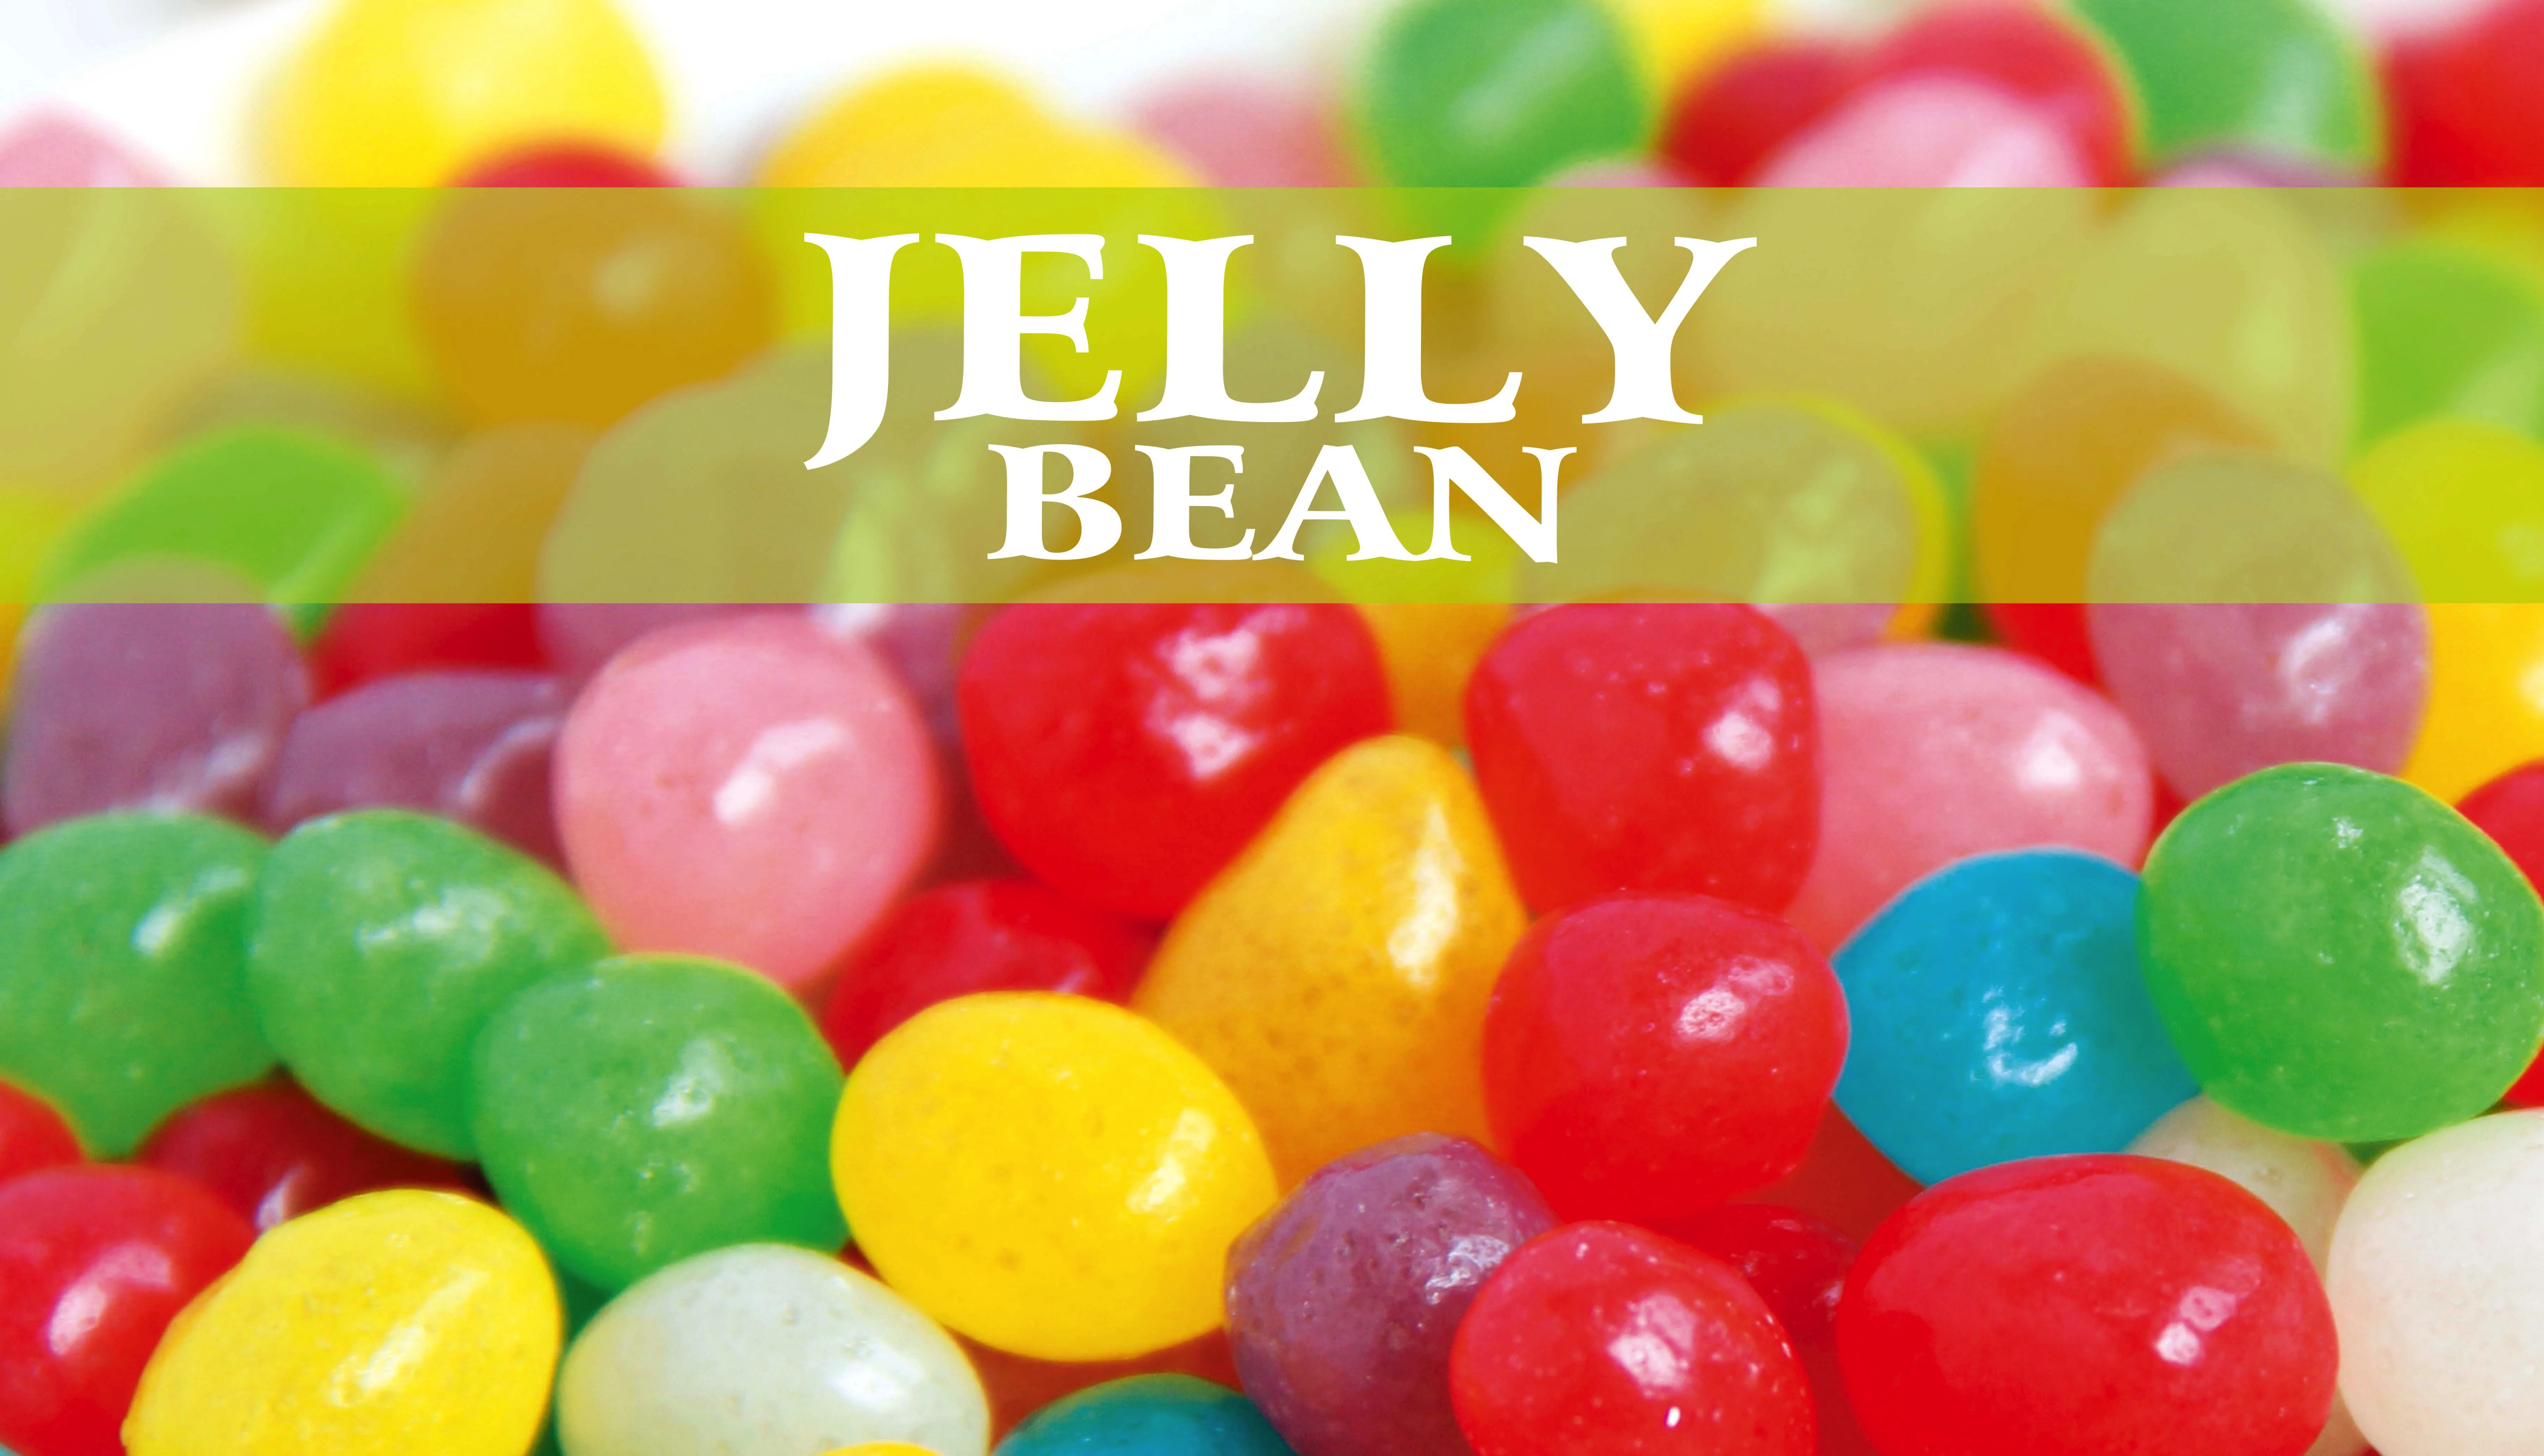 fruit flavours polished bean candy halal chewy jelly bean candy